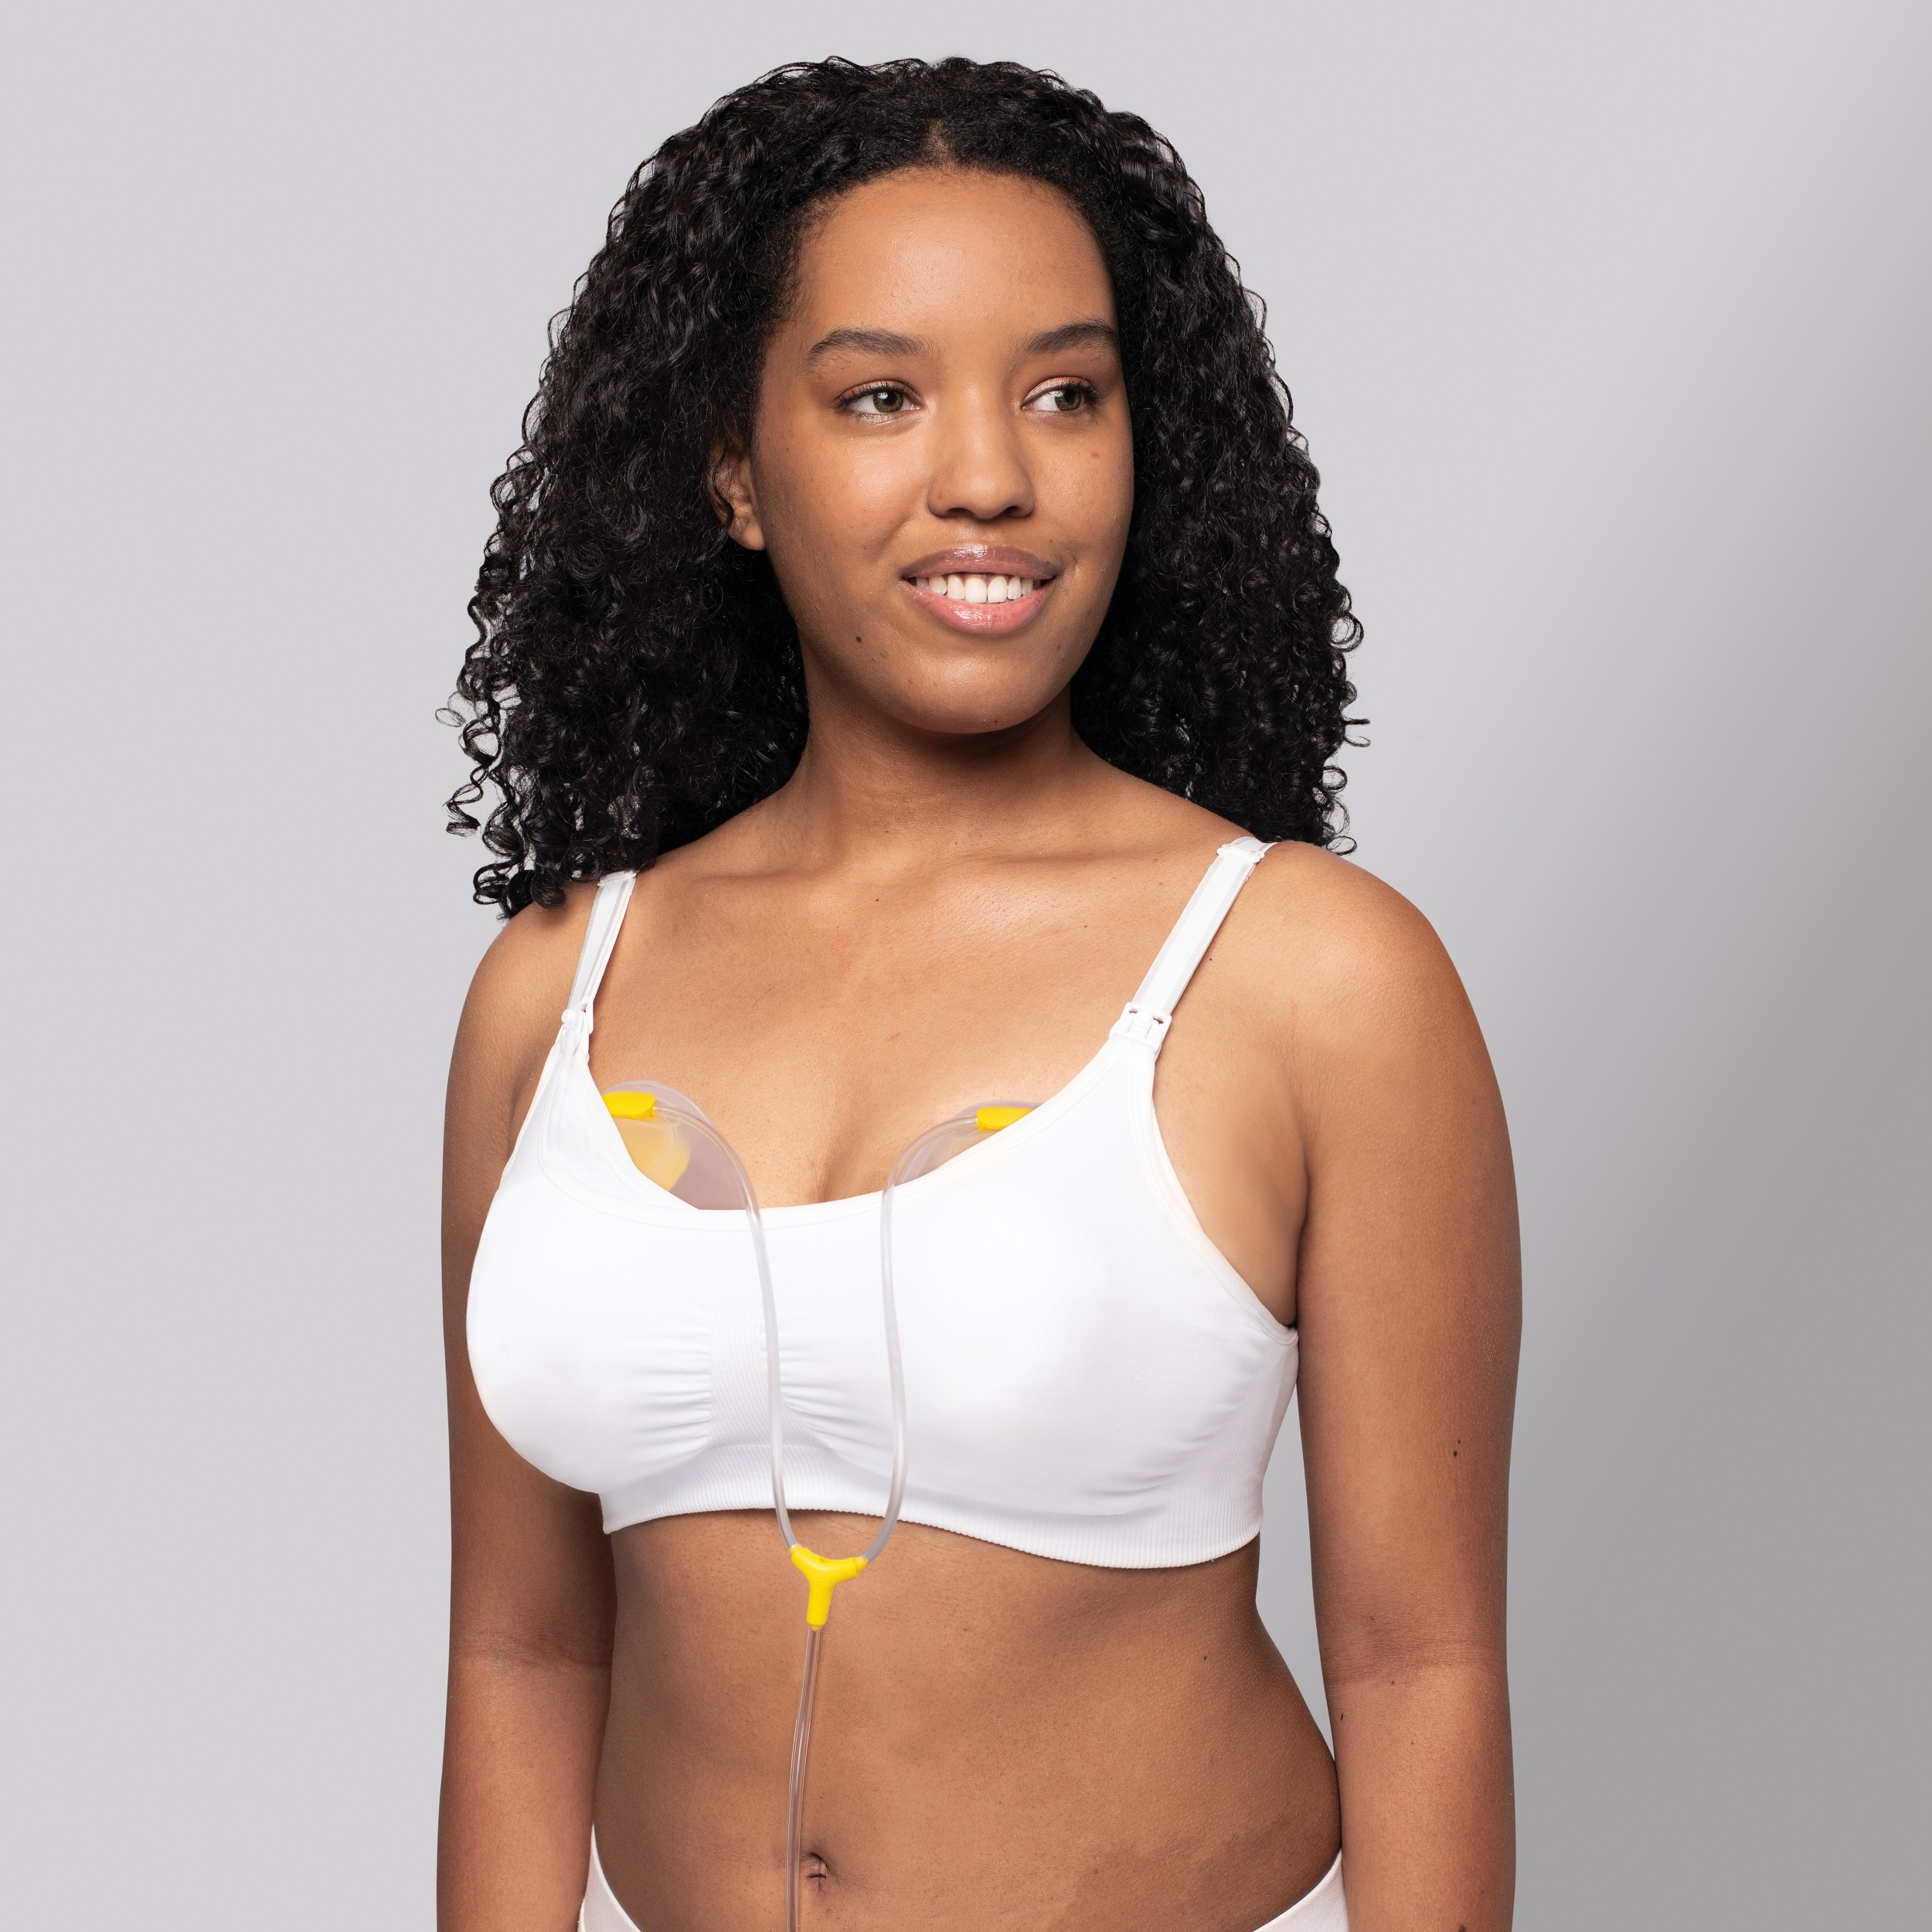 Buy Hands Free Pumping Bra, Comfortable Breast Pump Bra with Pads